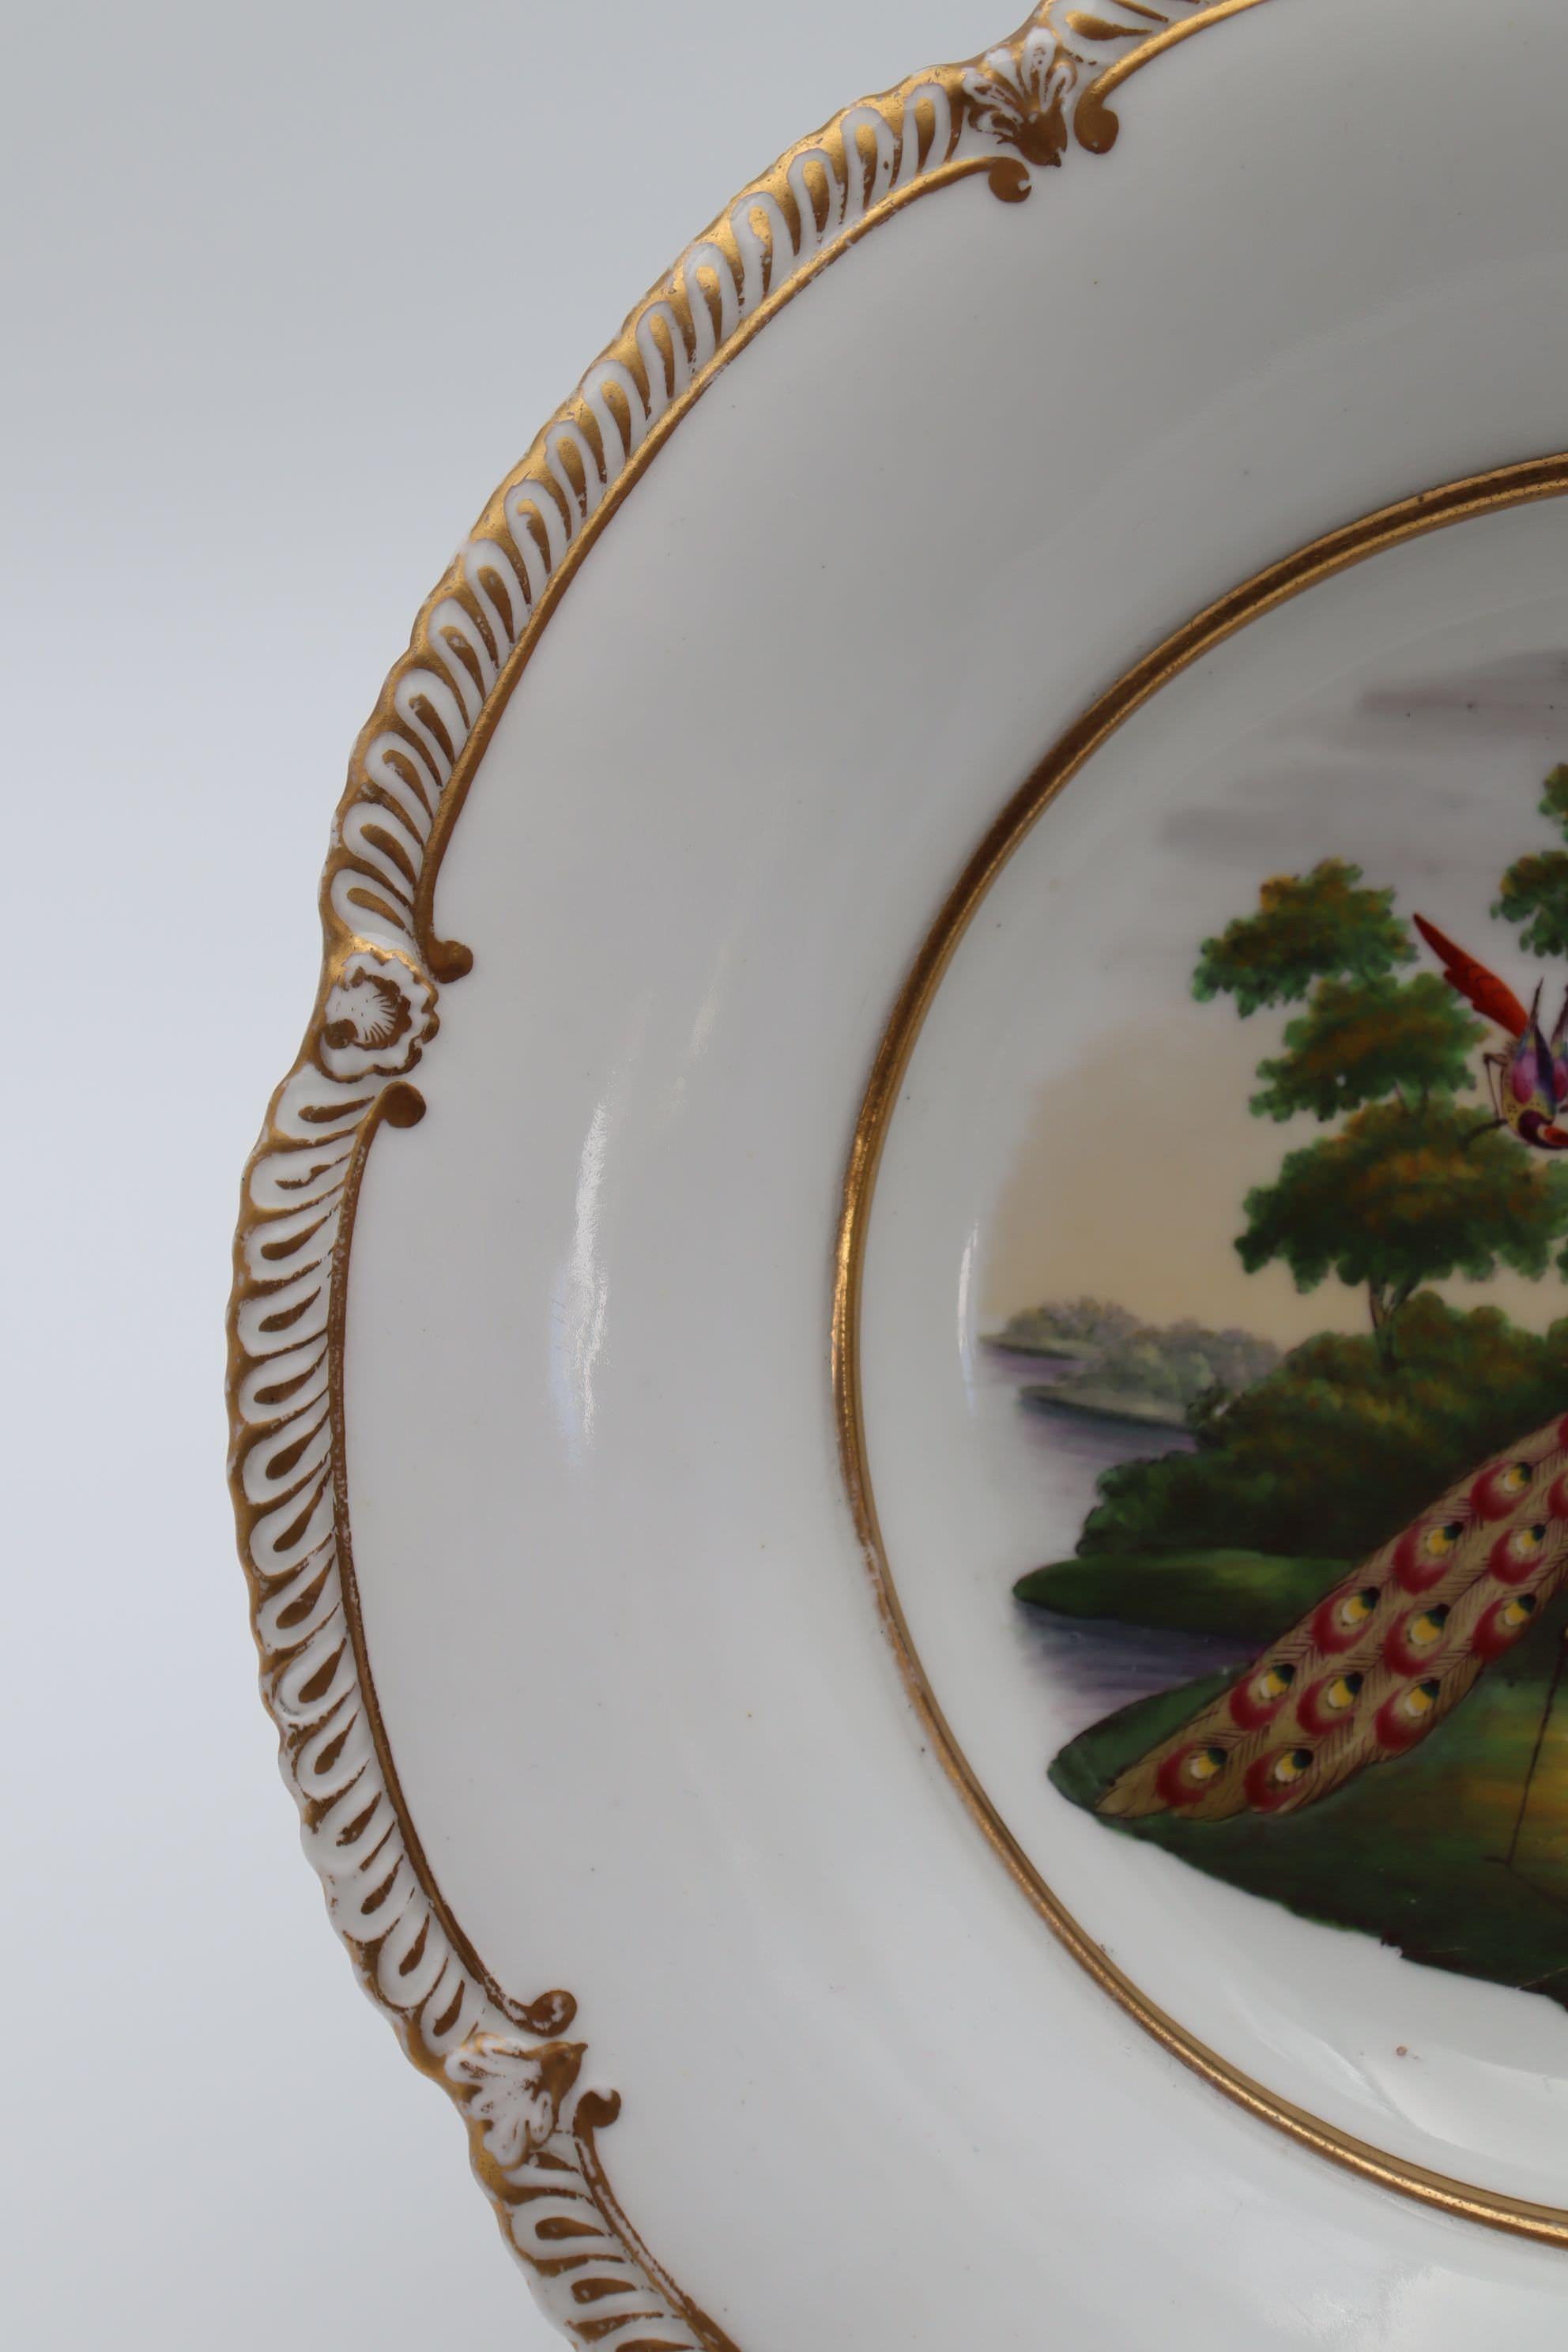 English Chamberlain Worcester Porcelain Comport Decorated with Fancy Birds For Sale